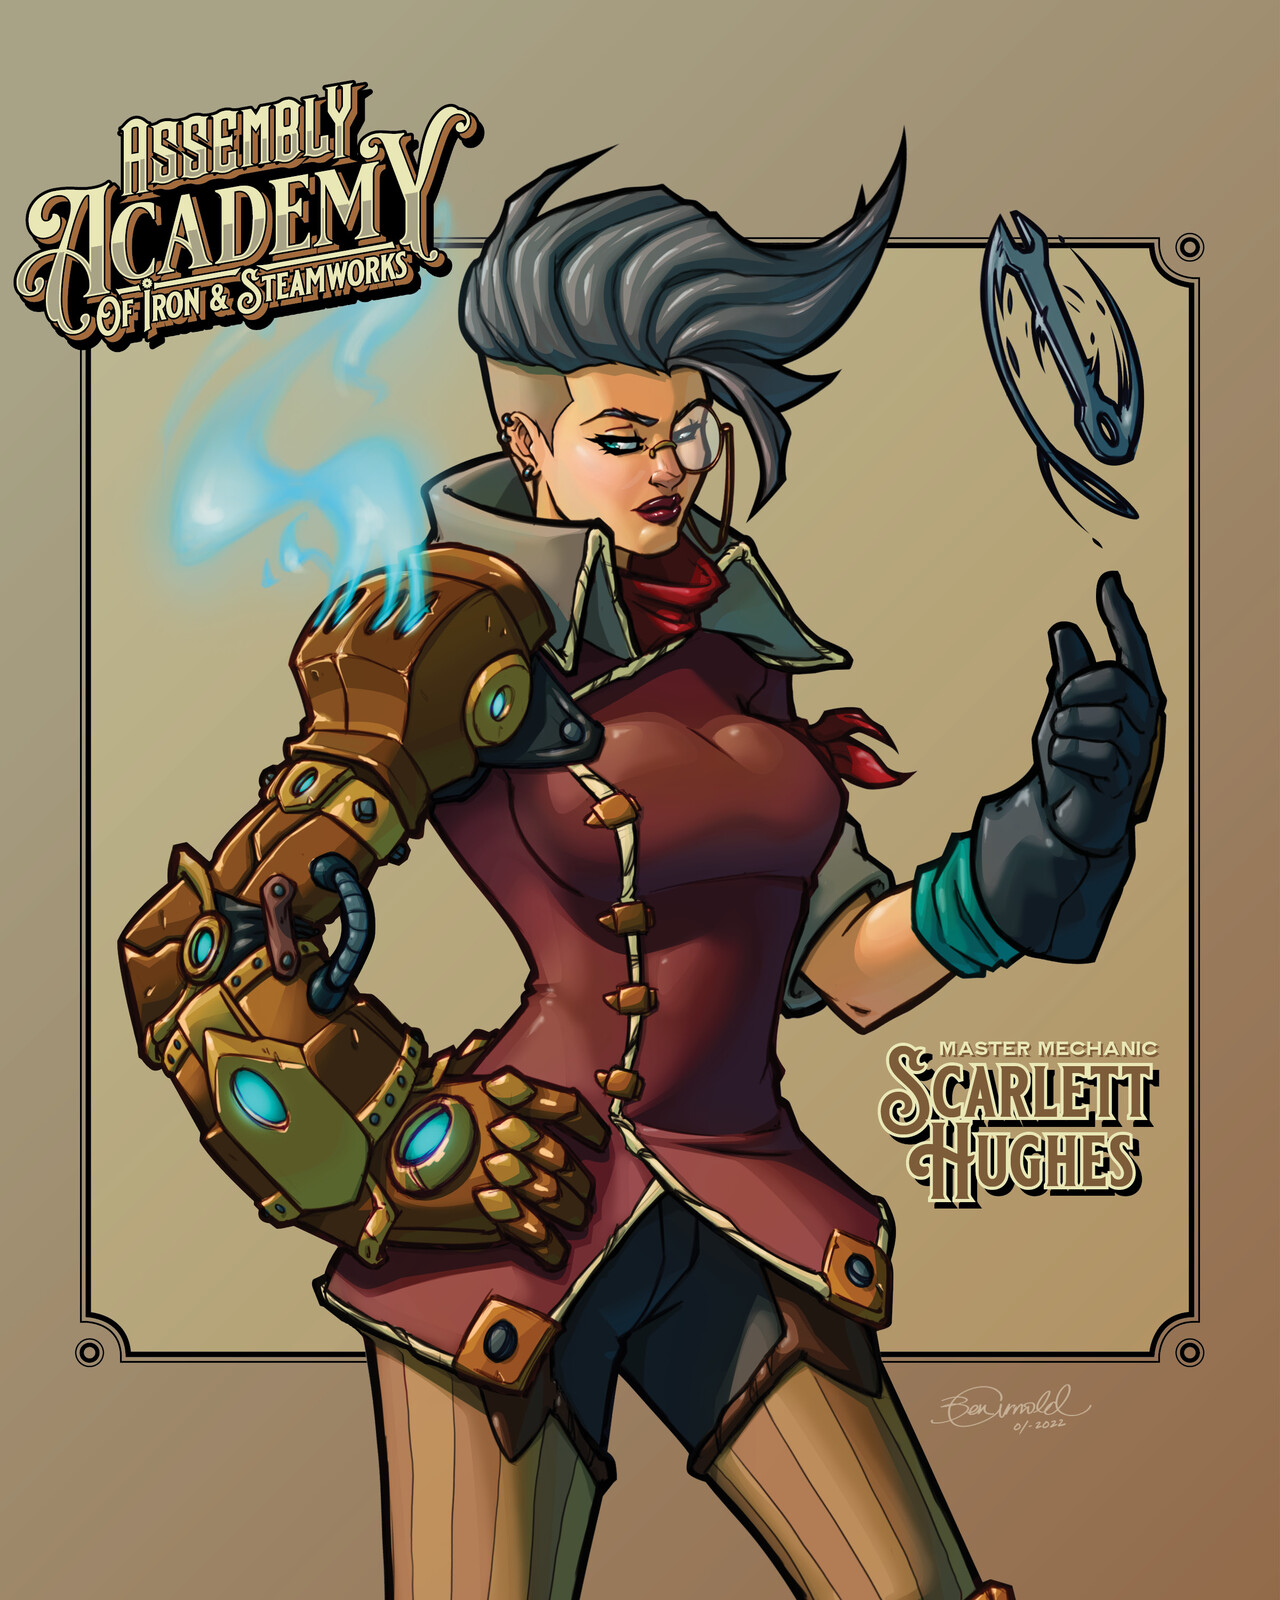 Assembly Academy Of Iron &amp; Steamworks - Comic Book Concept